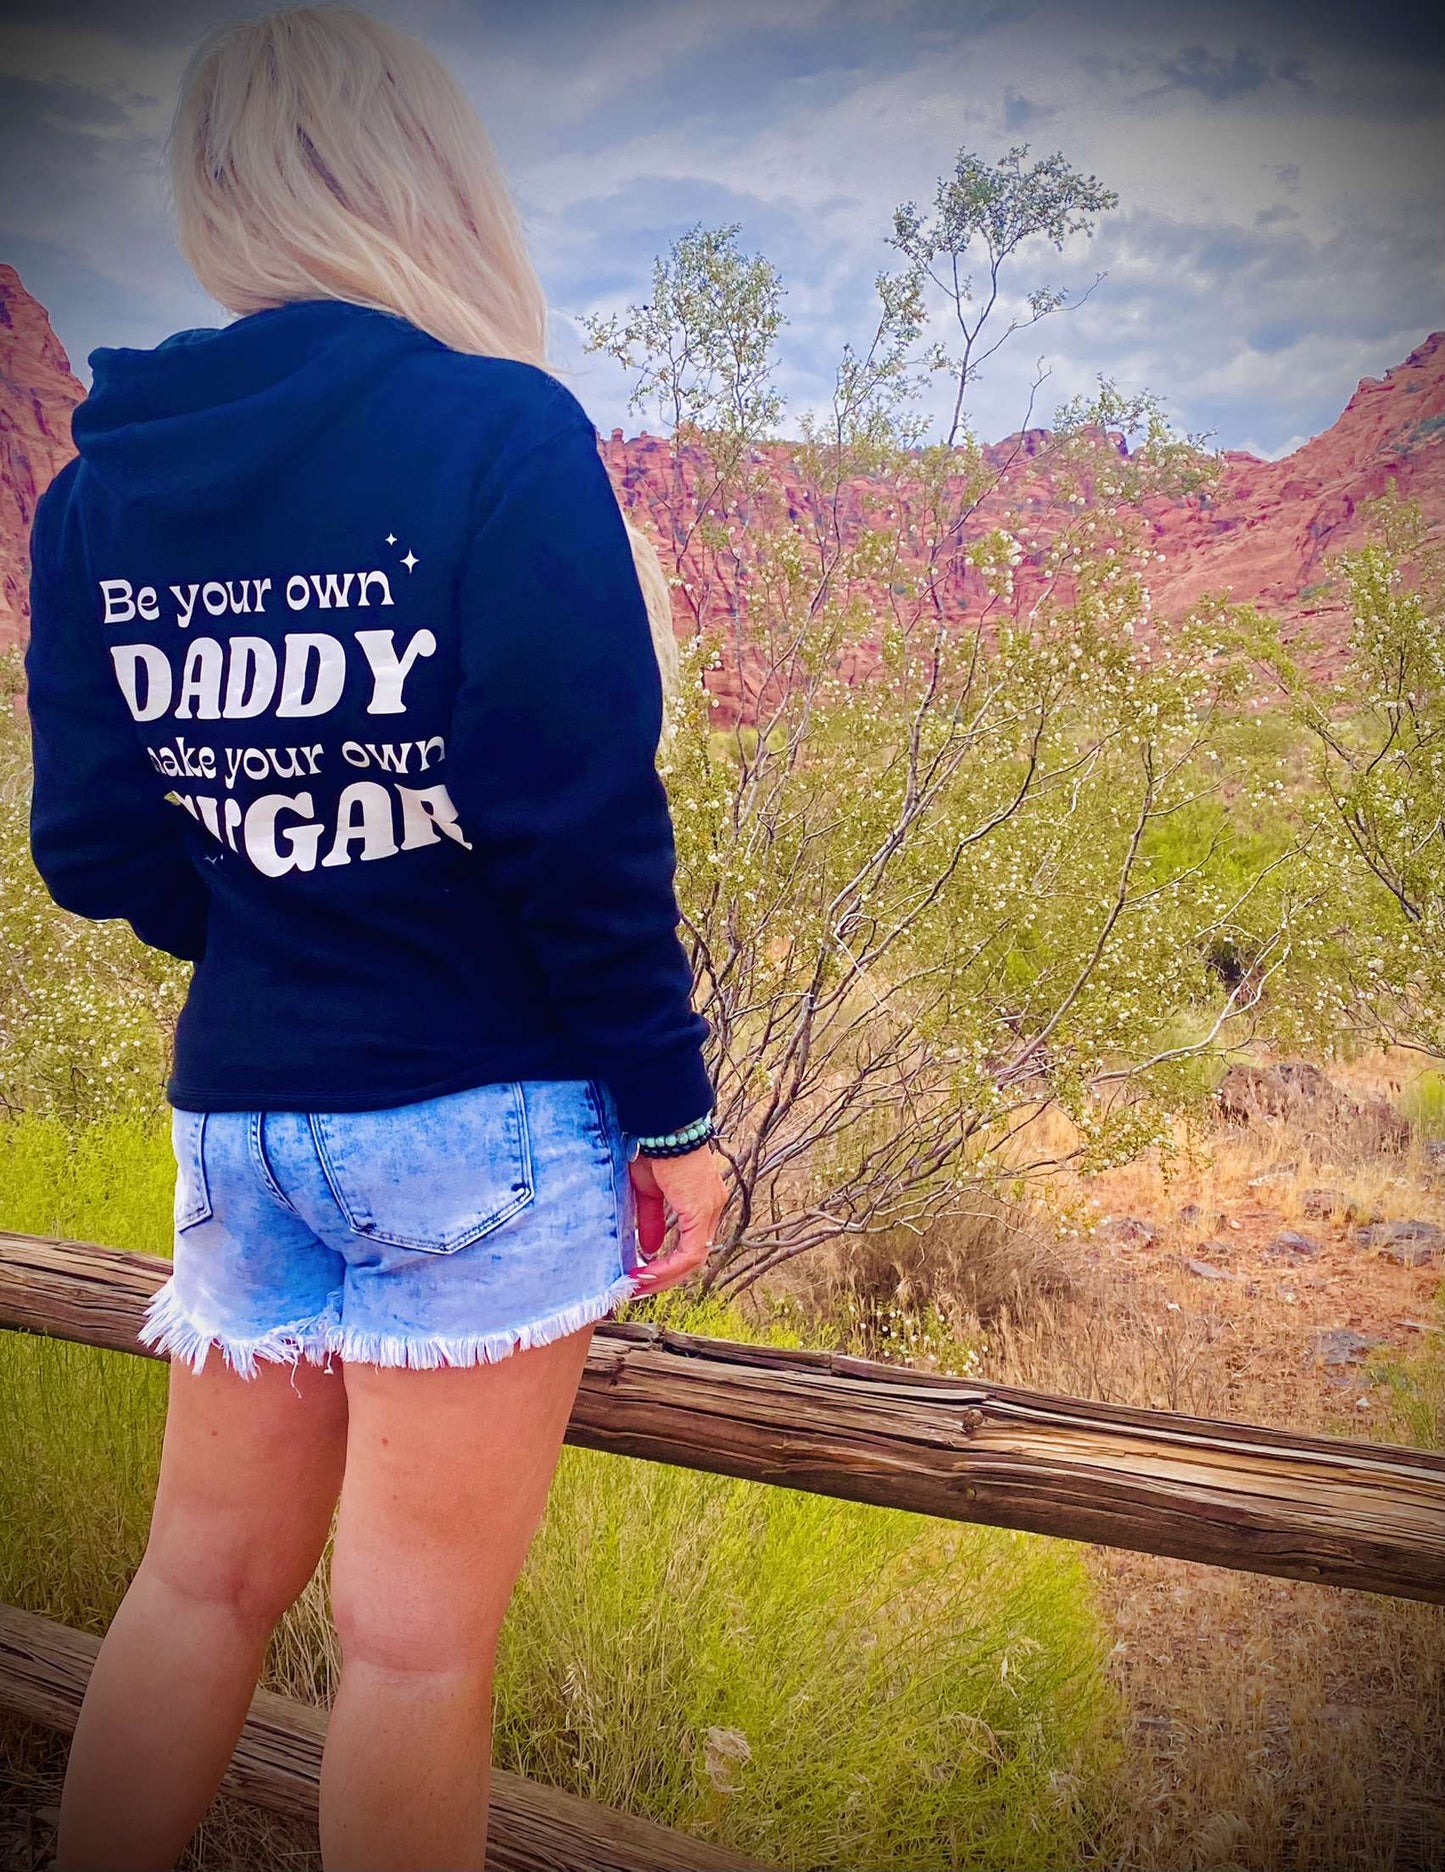 Be your Own Daddy Make your Own Sugar Hoodie